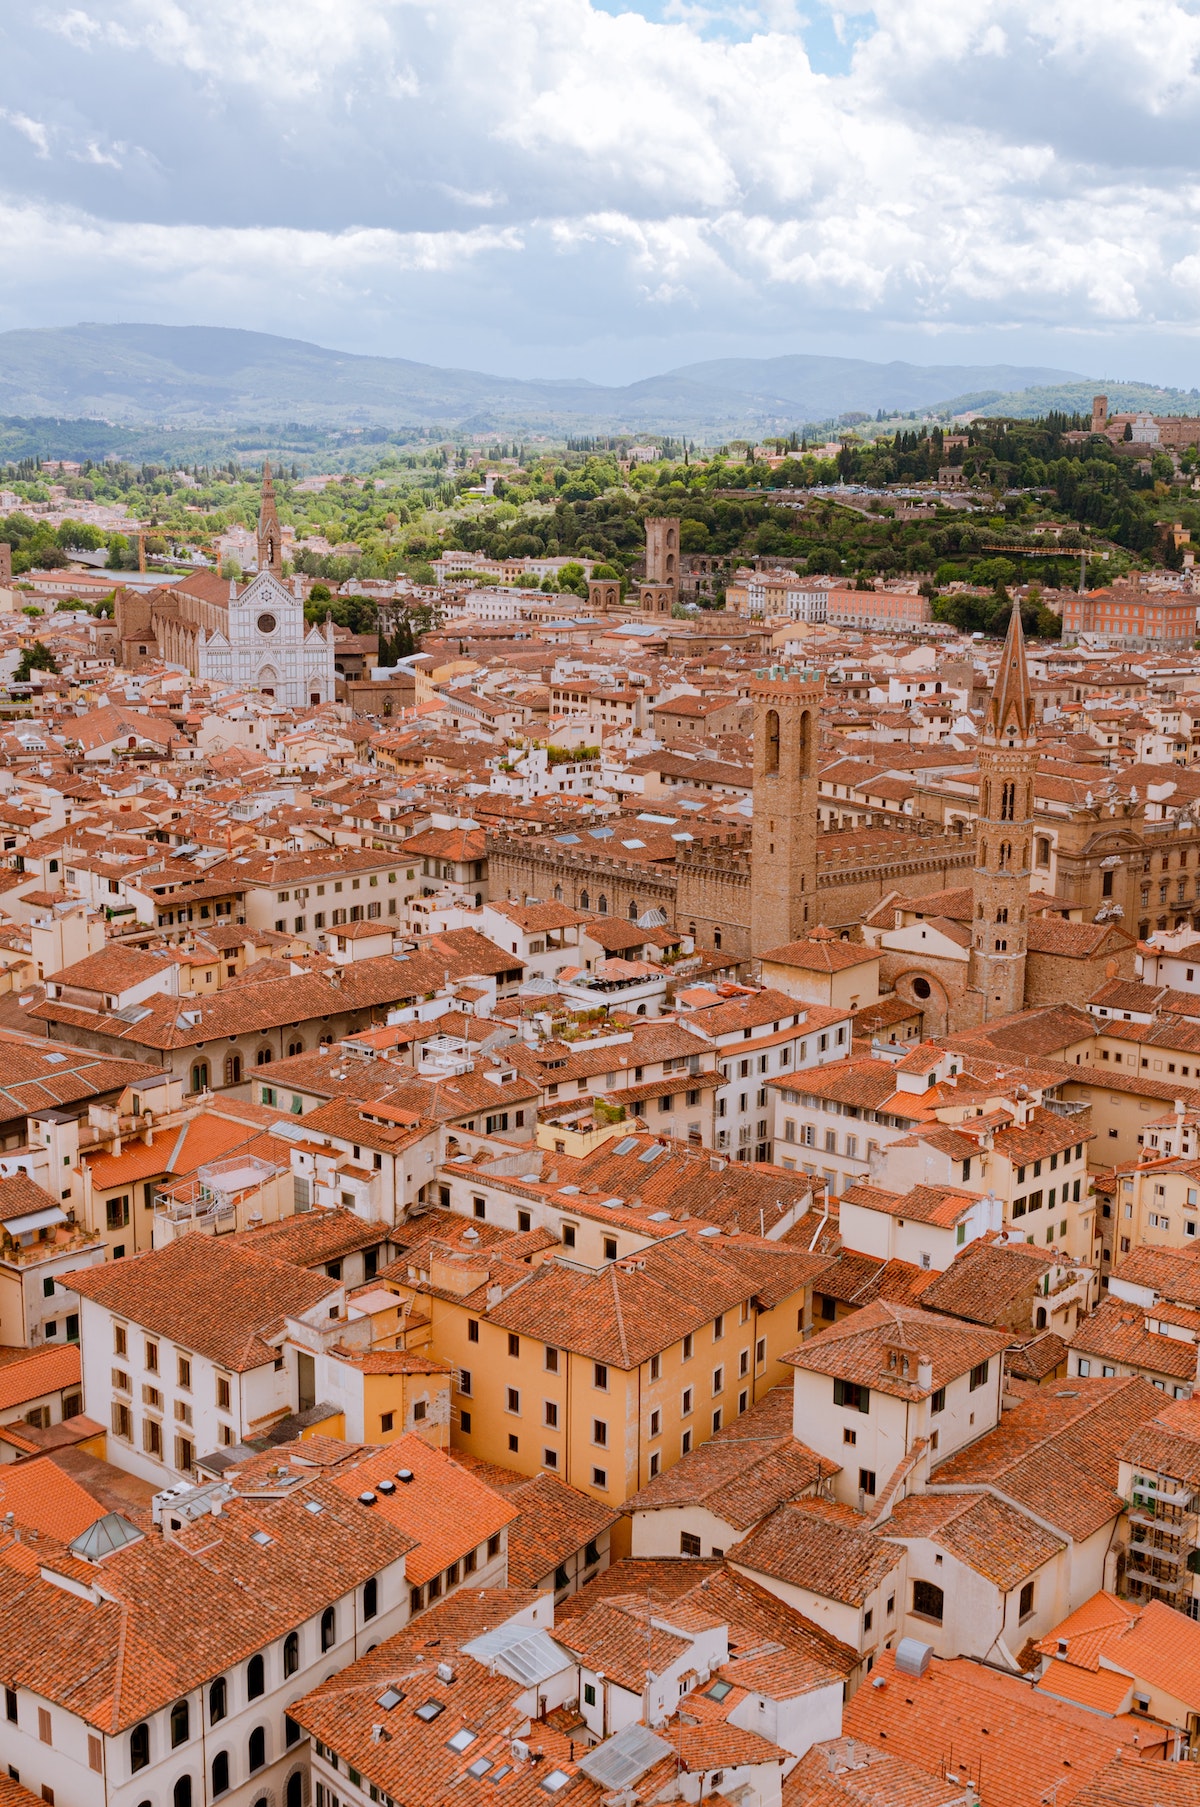 View over a historic town center with red-tiled roofs on many of the buildings